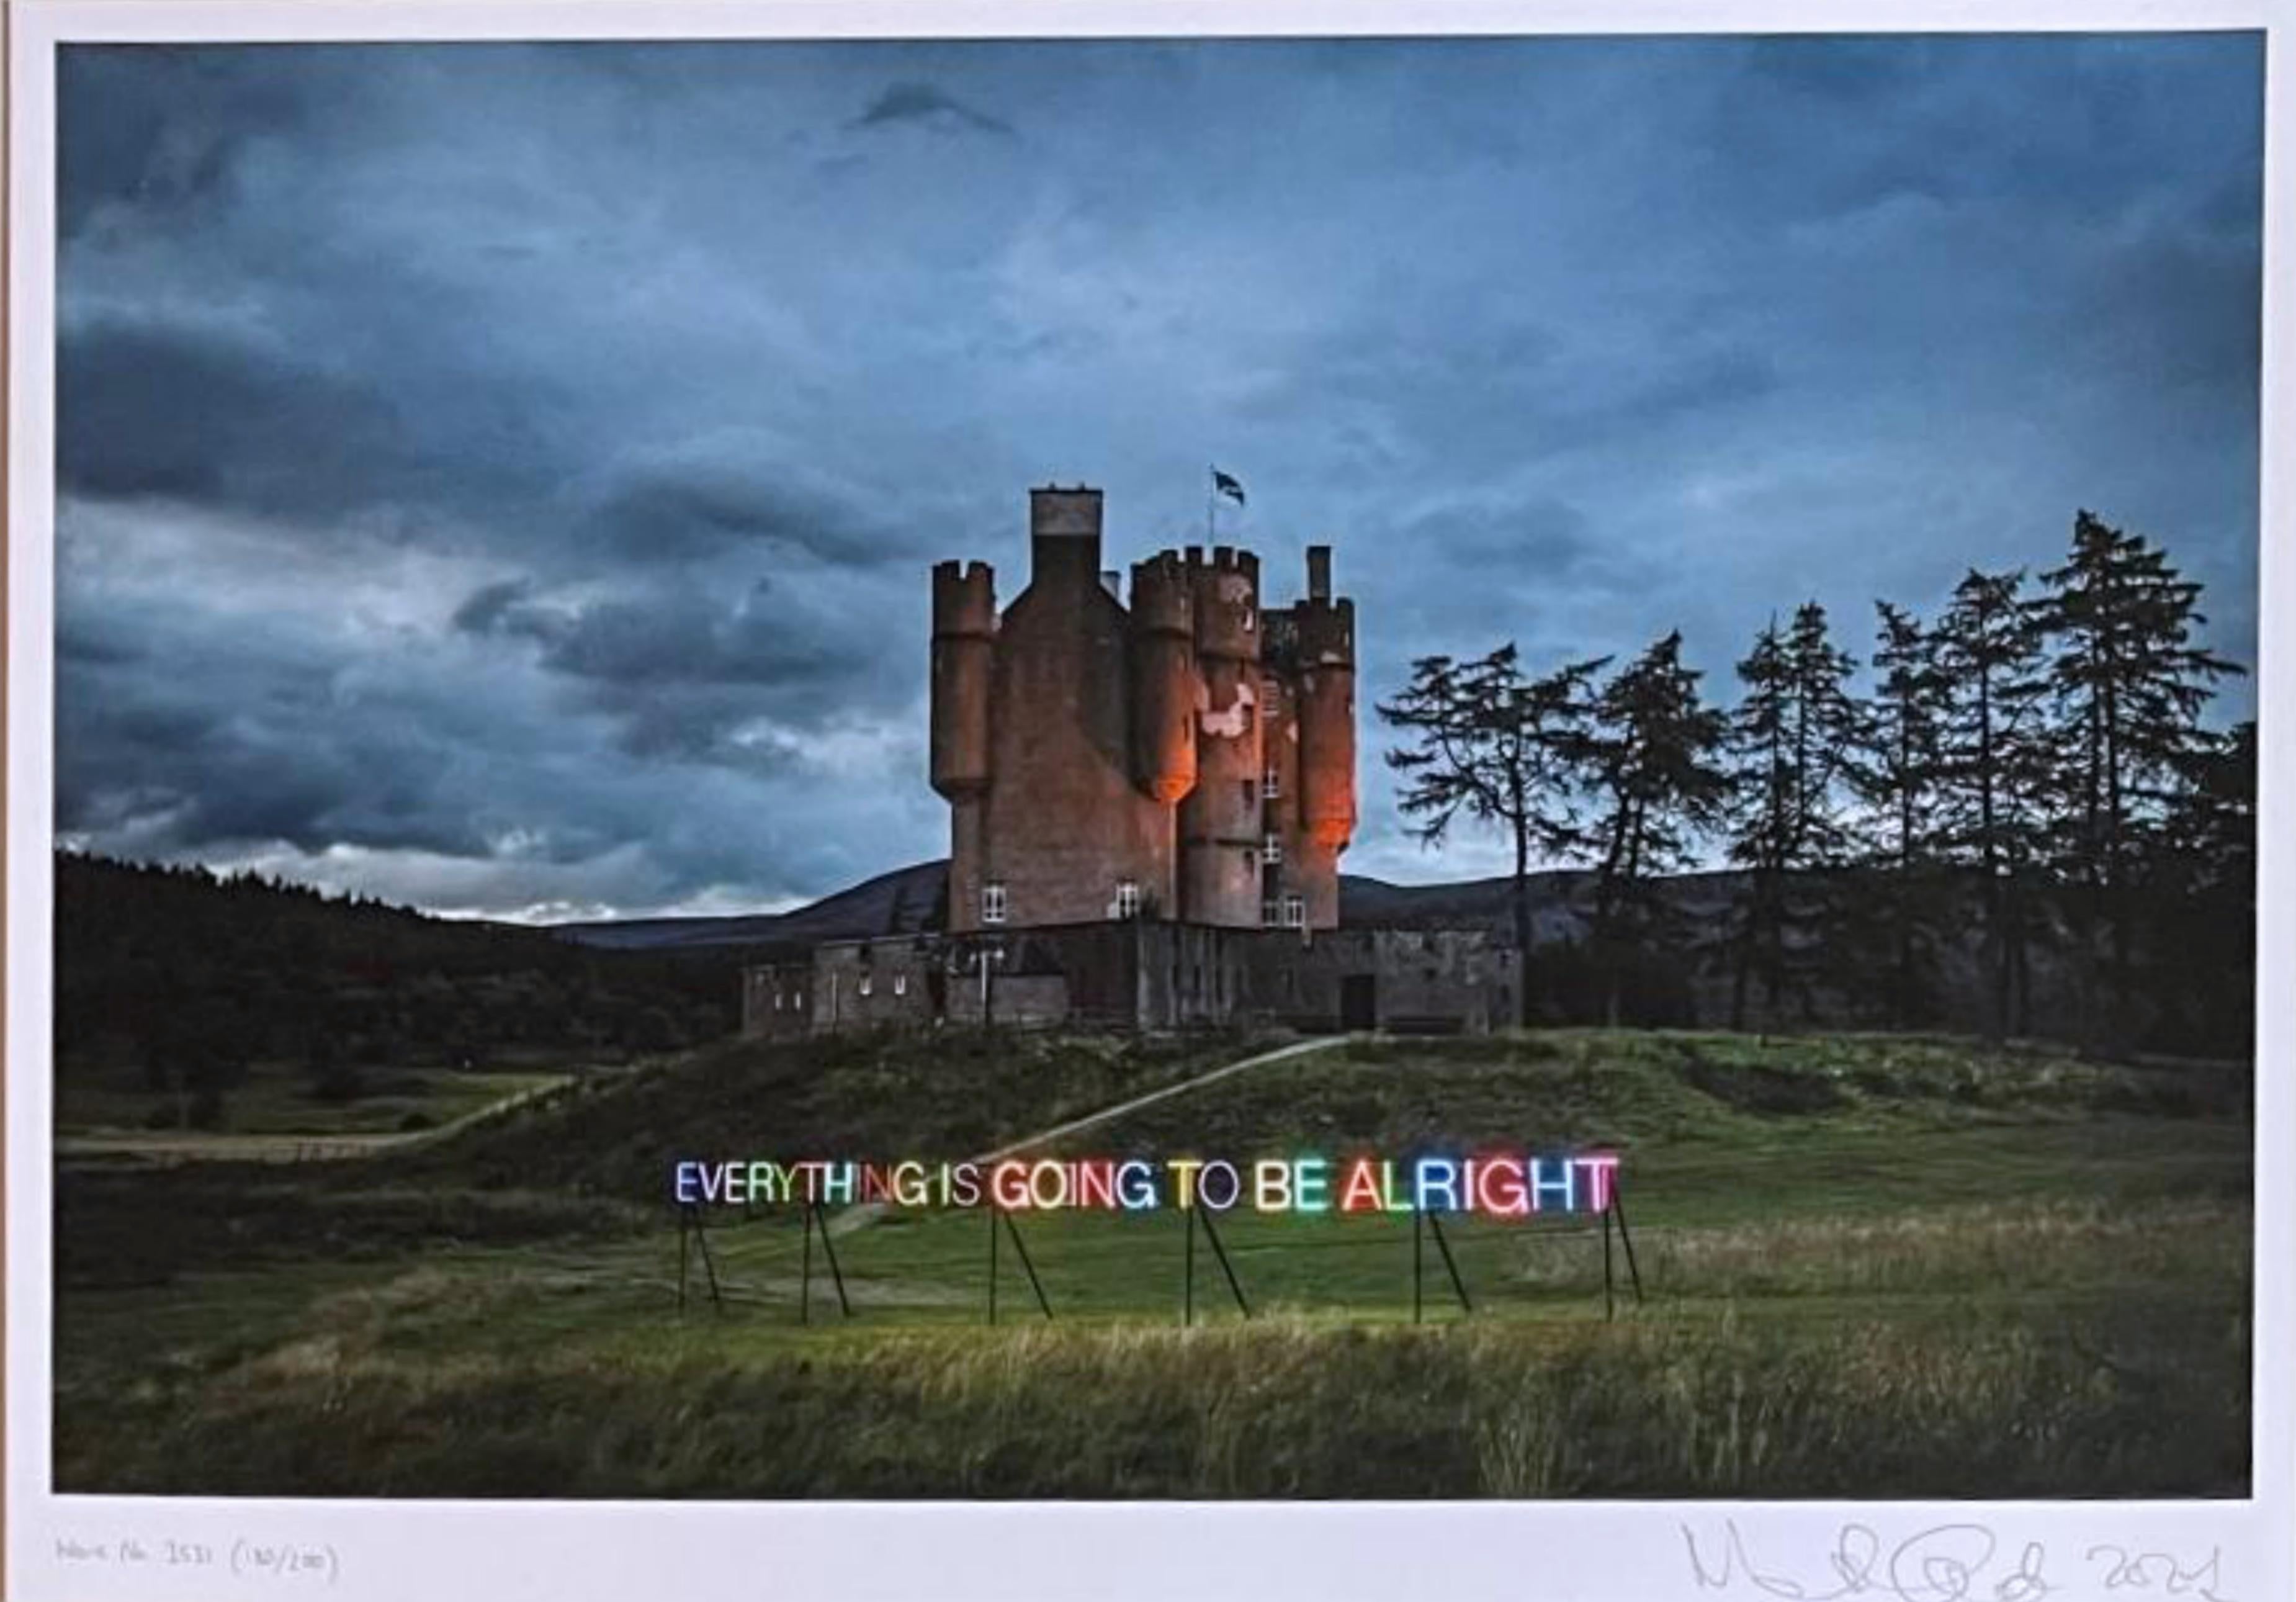 Martin Creed Landscape Print - Everything's Going to be Alright (Work No. 3531) with bespoke archival gift box 